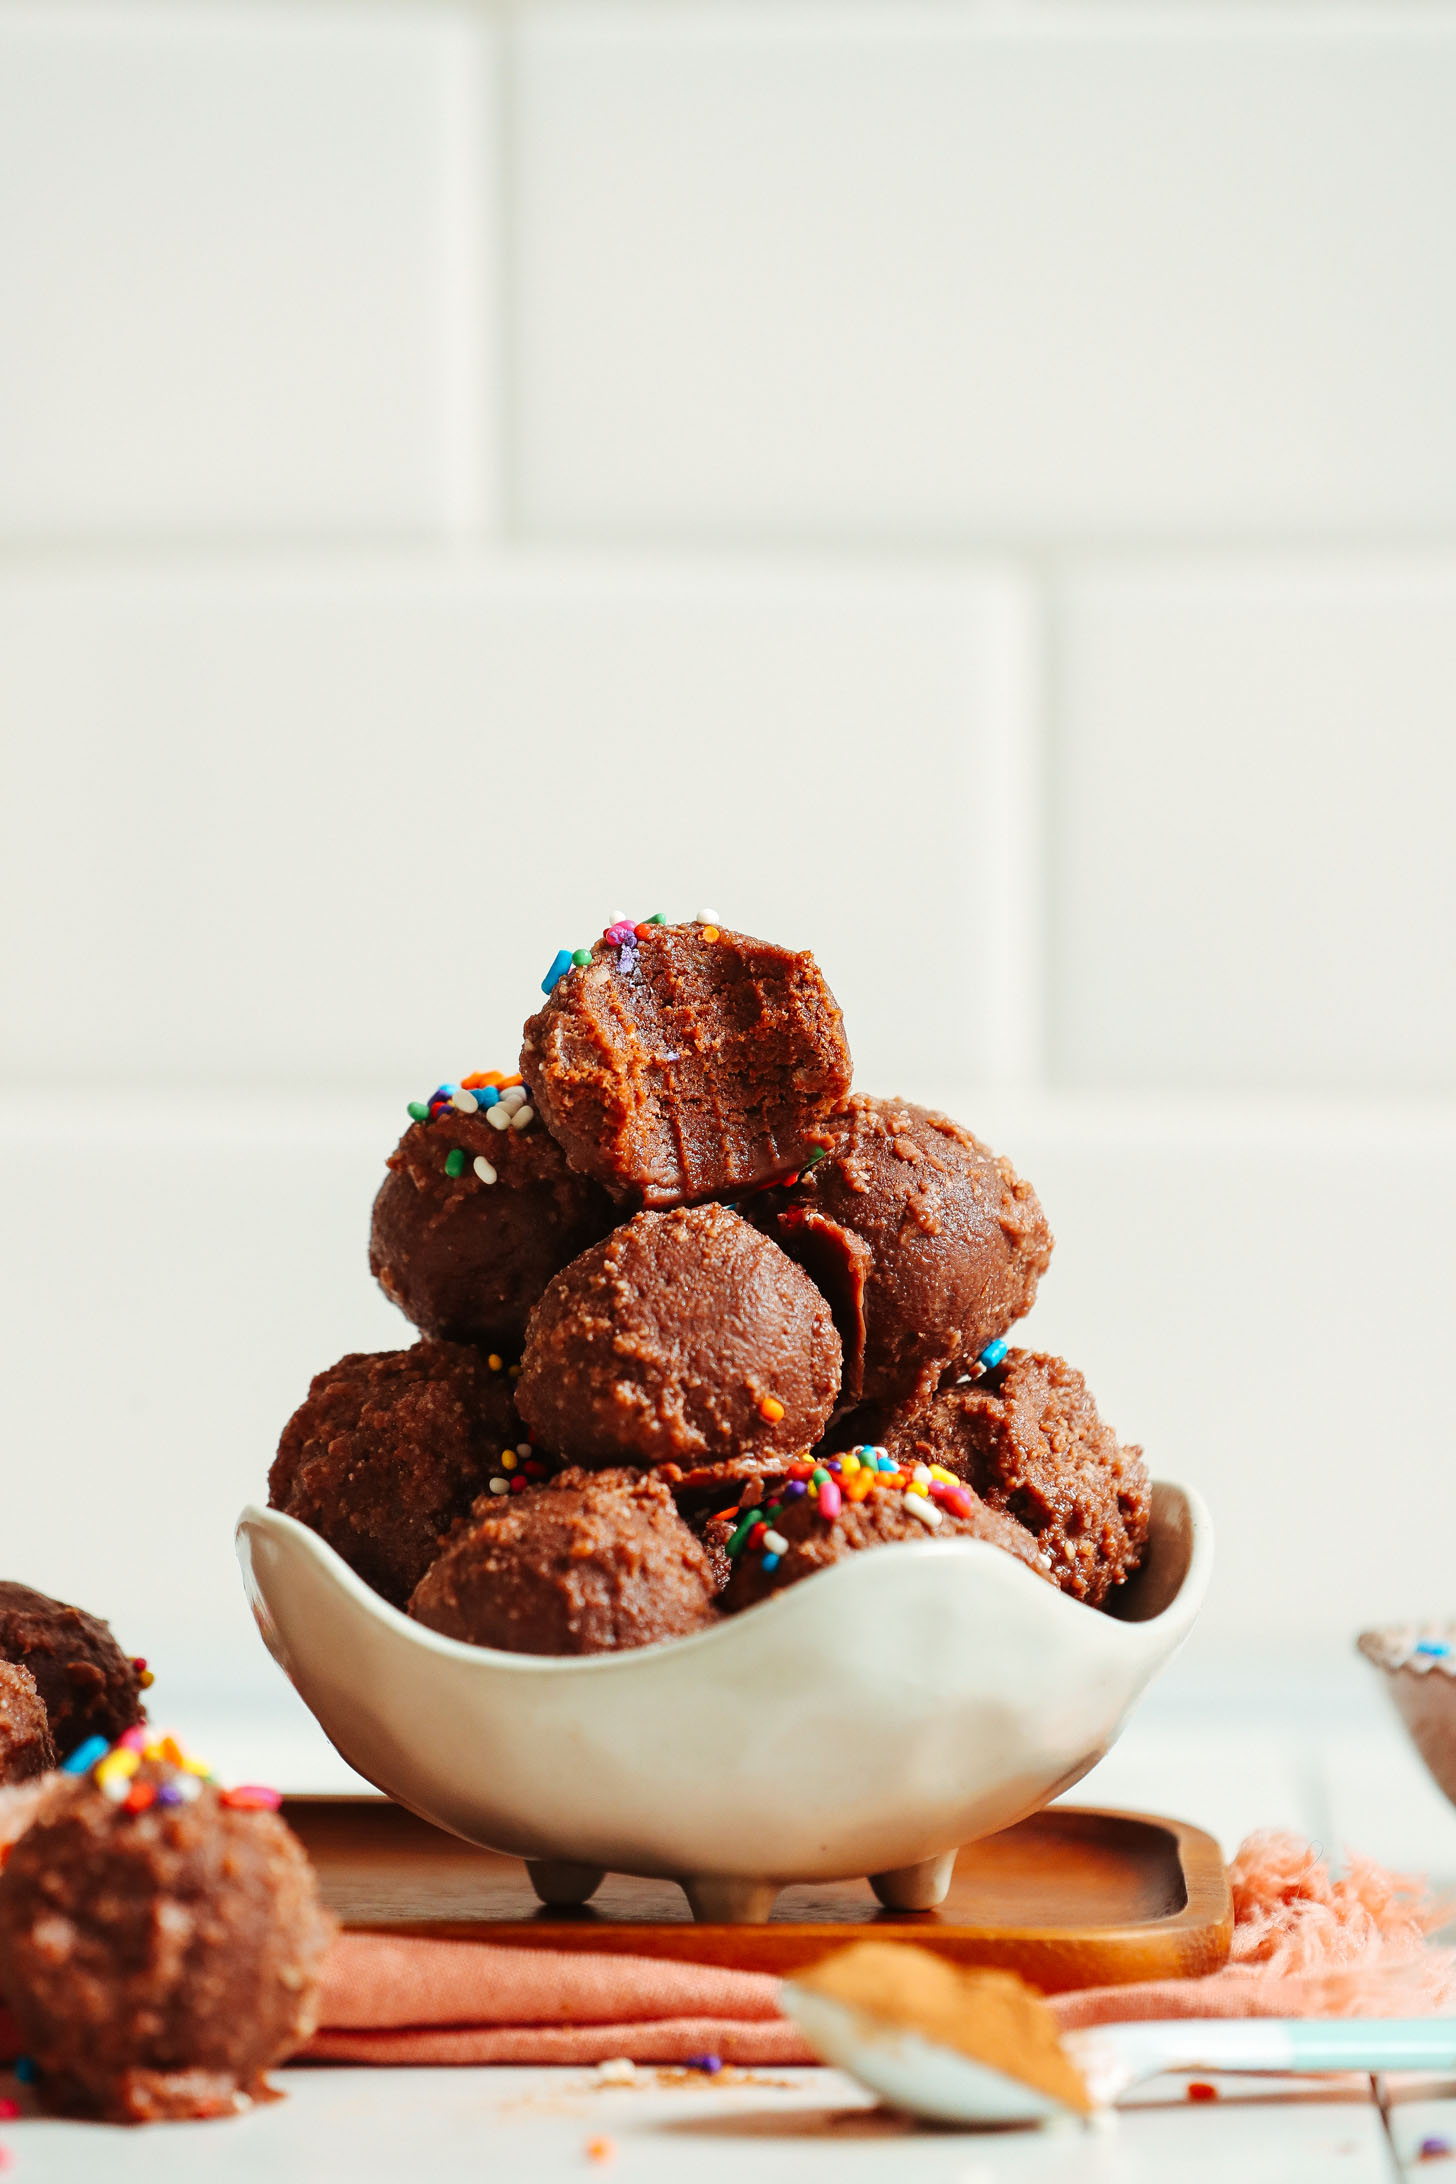 Bowl of Vegan Chocolate Cake Bites topped with colorful sprinkles